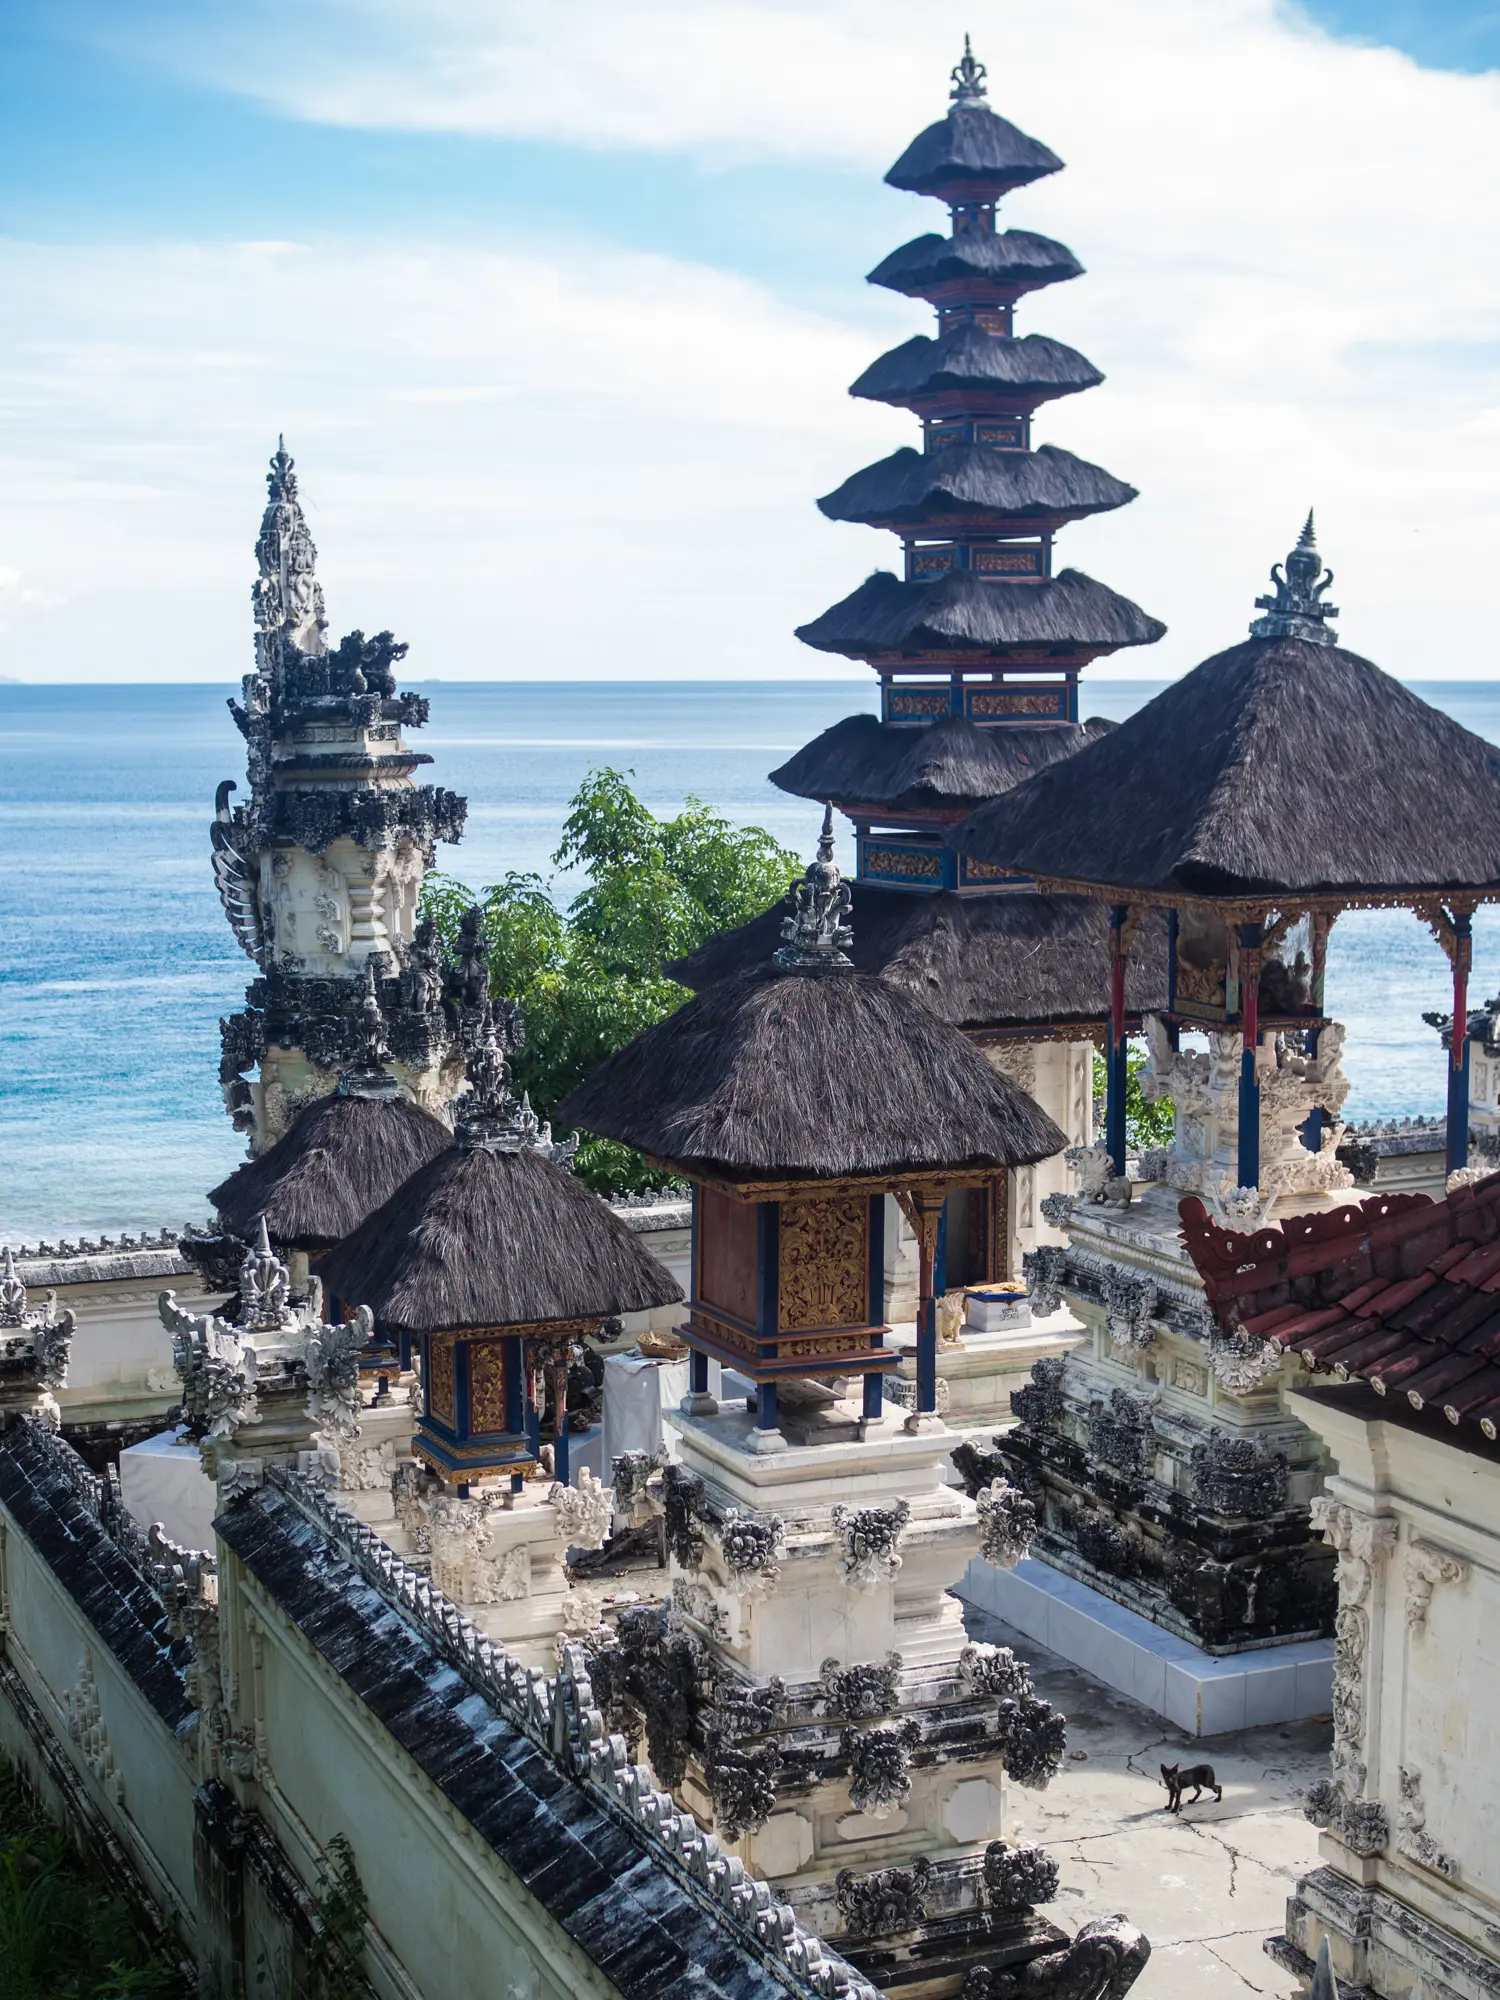 White traditional temple by the ocean in Nusa Penida, one of the many reasons making the island worth visiting.